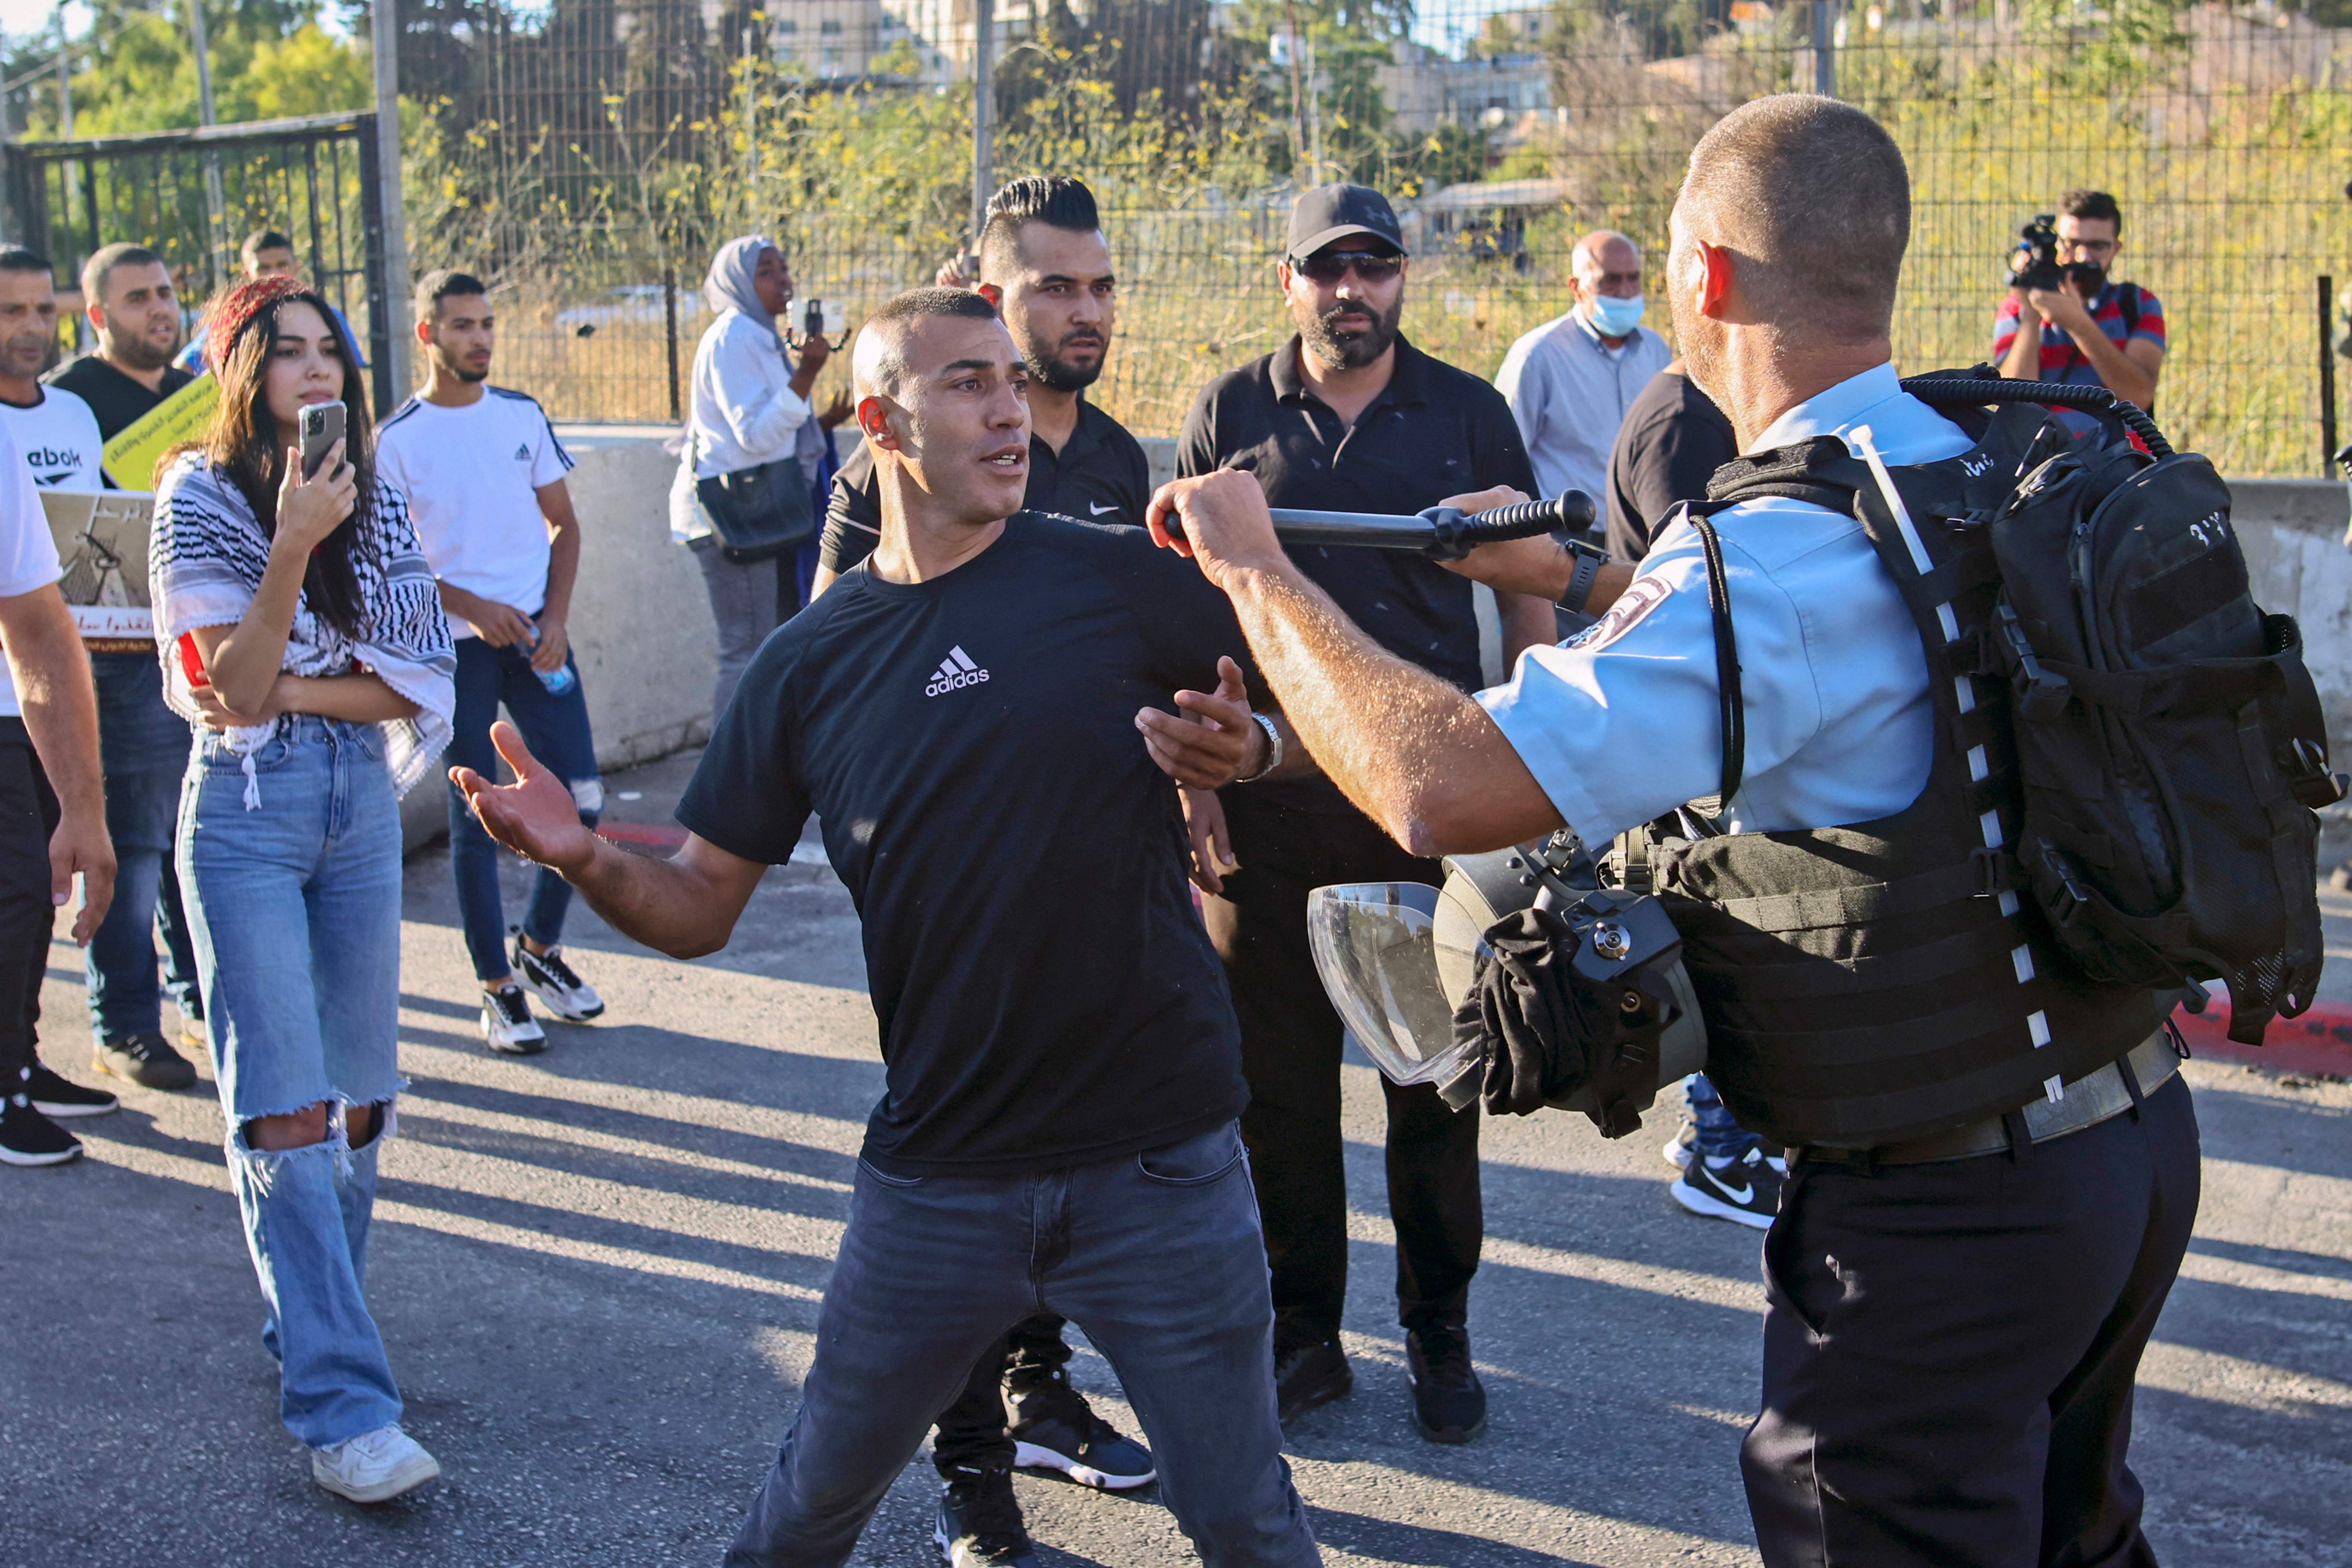 A Palestinian protester scuffles with a member of Israeli security forces near a roadblock at the entrance of the Sheikh Jarrah neighbourhood in east Jerusalem during a rally against the planned expulsion of Palestinians from houses there